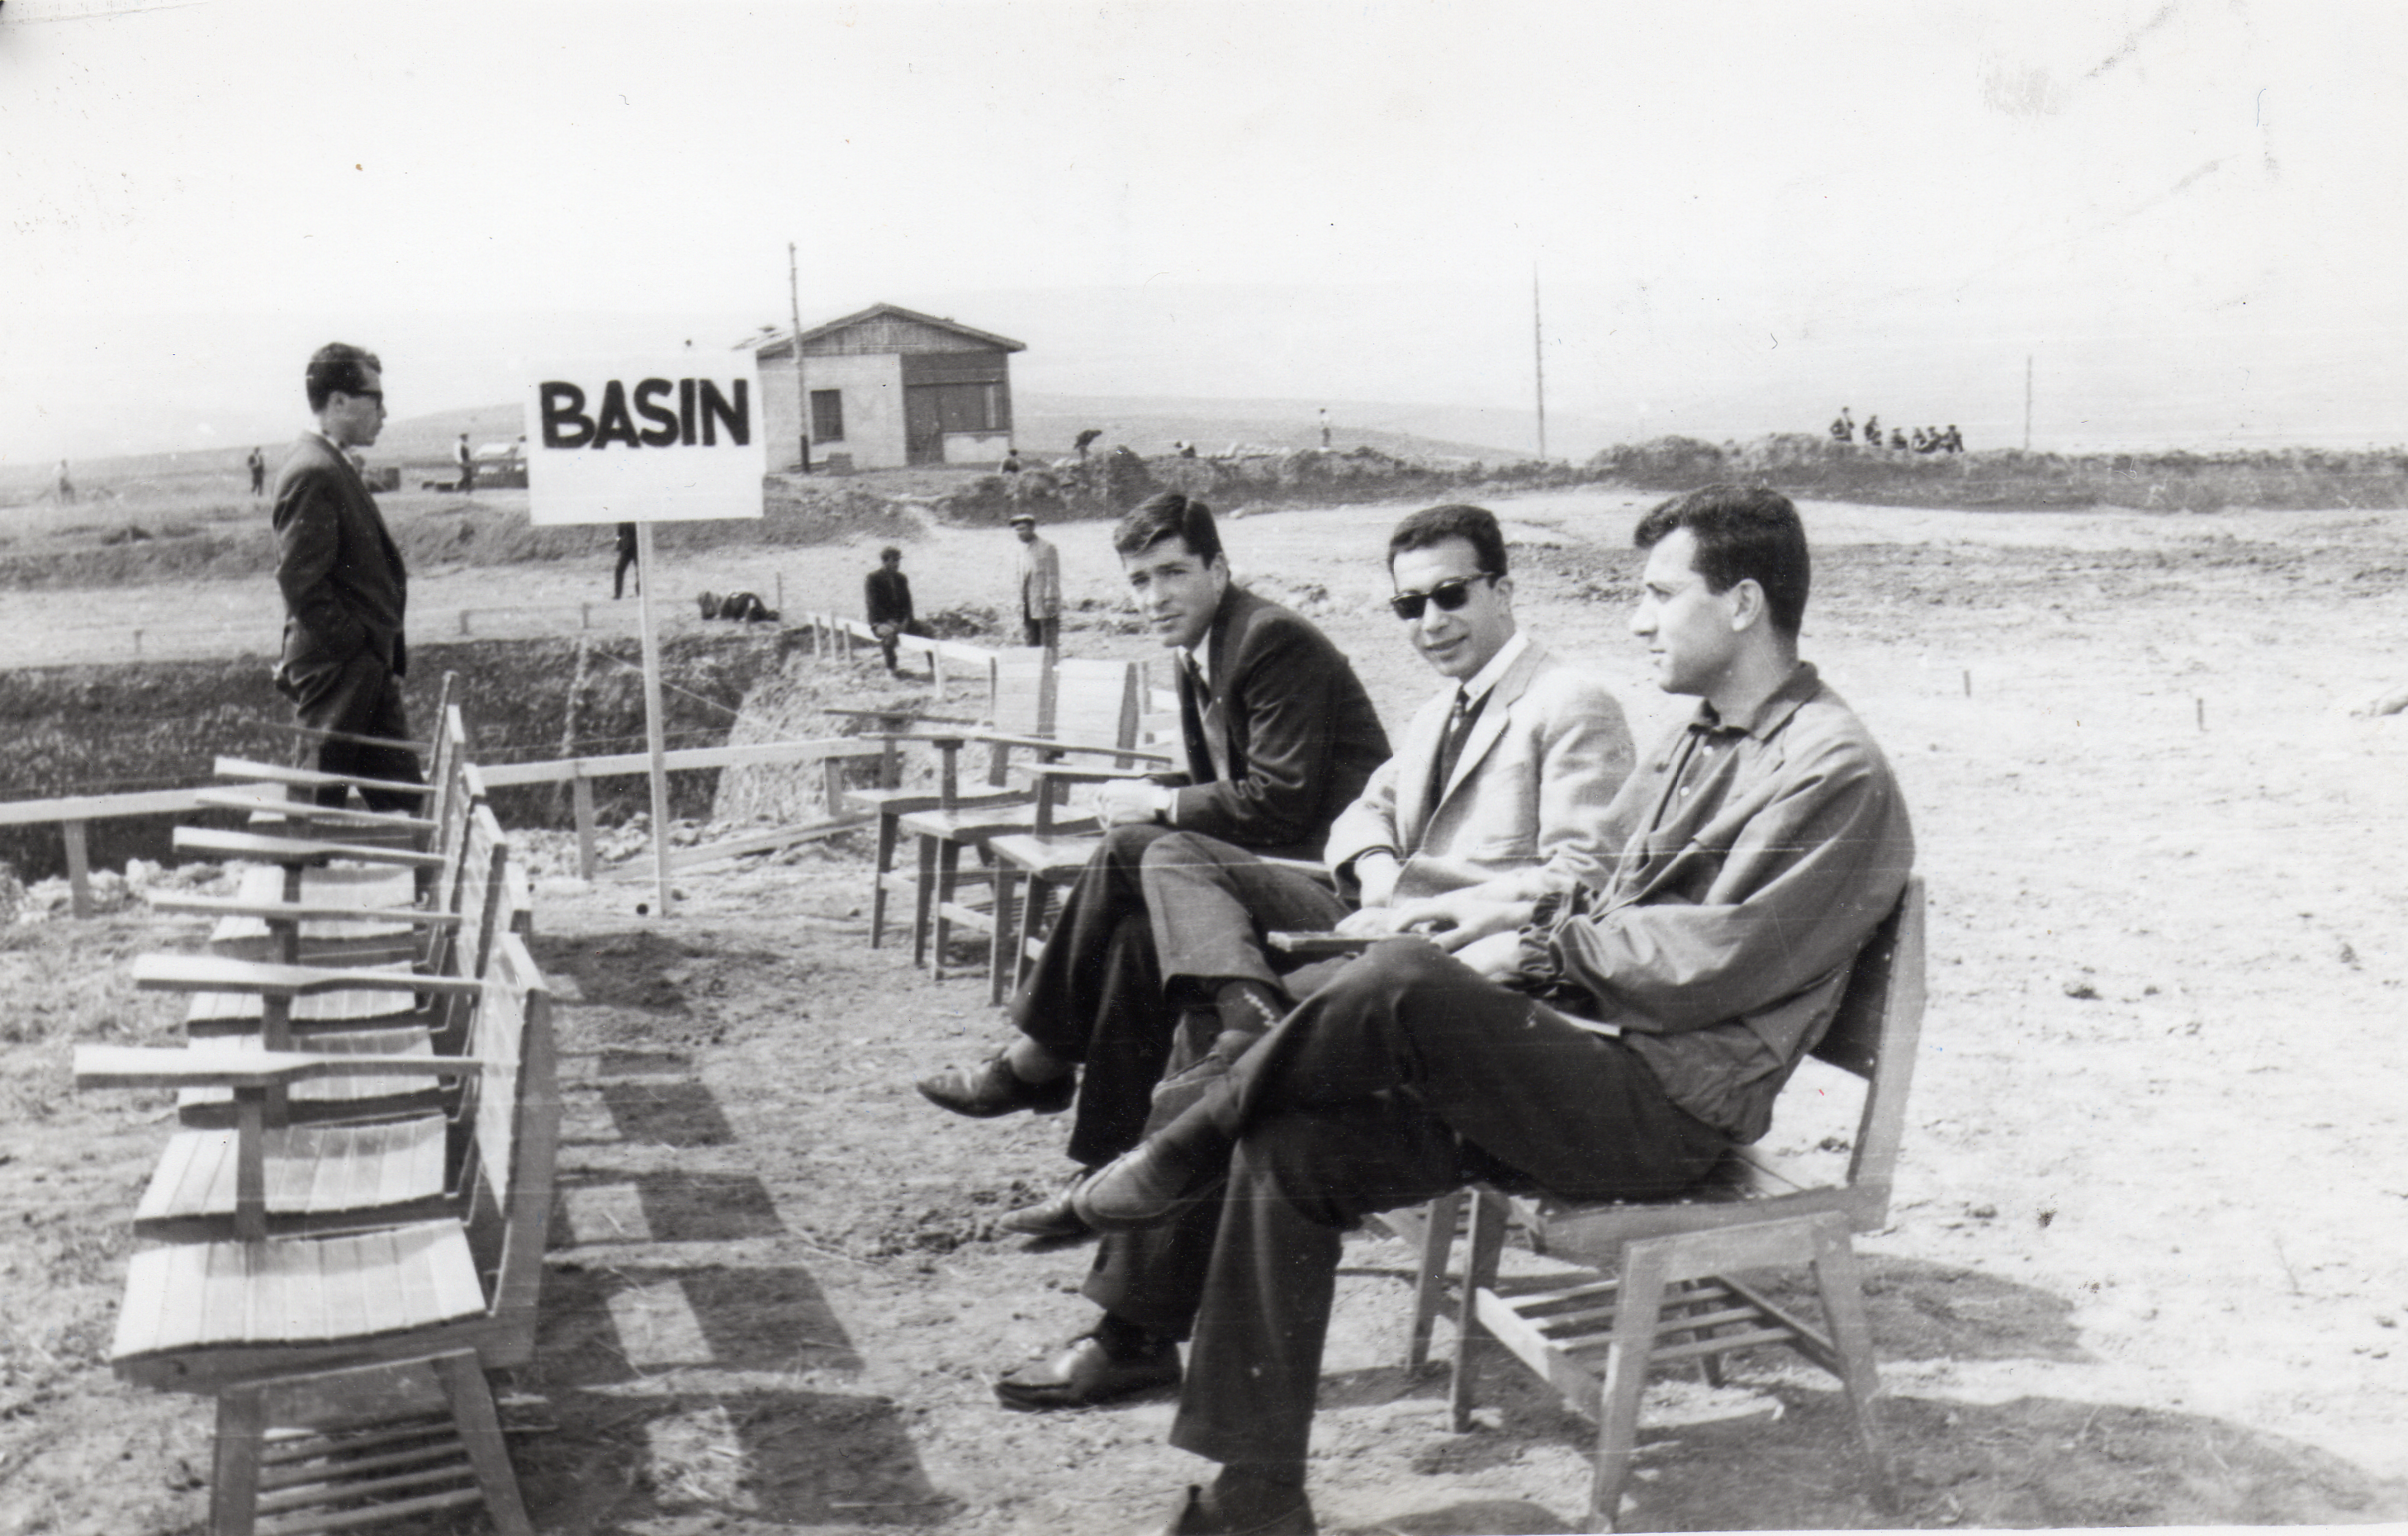 June 1962, before the graduation ceremony (when the new campus was not even a construction site)